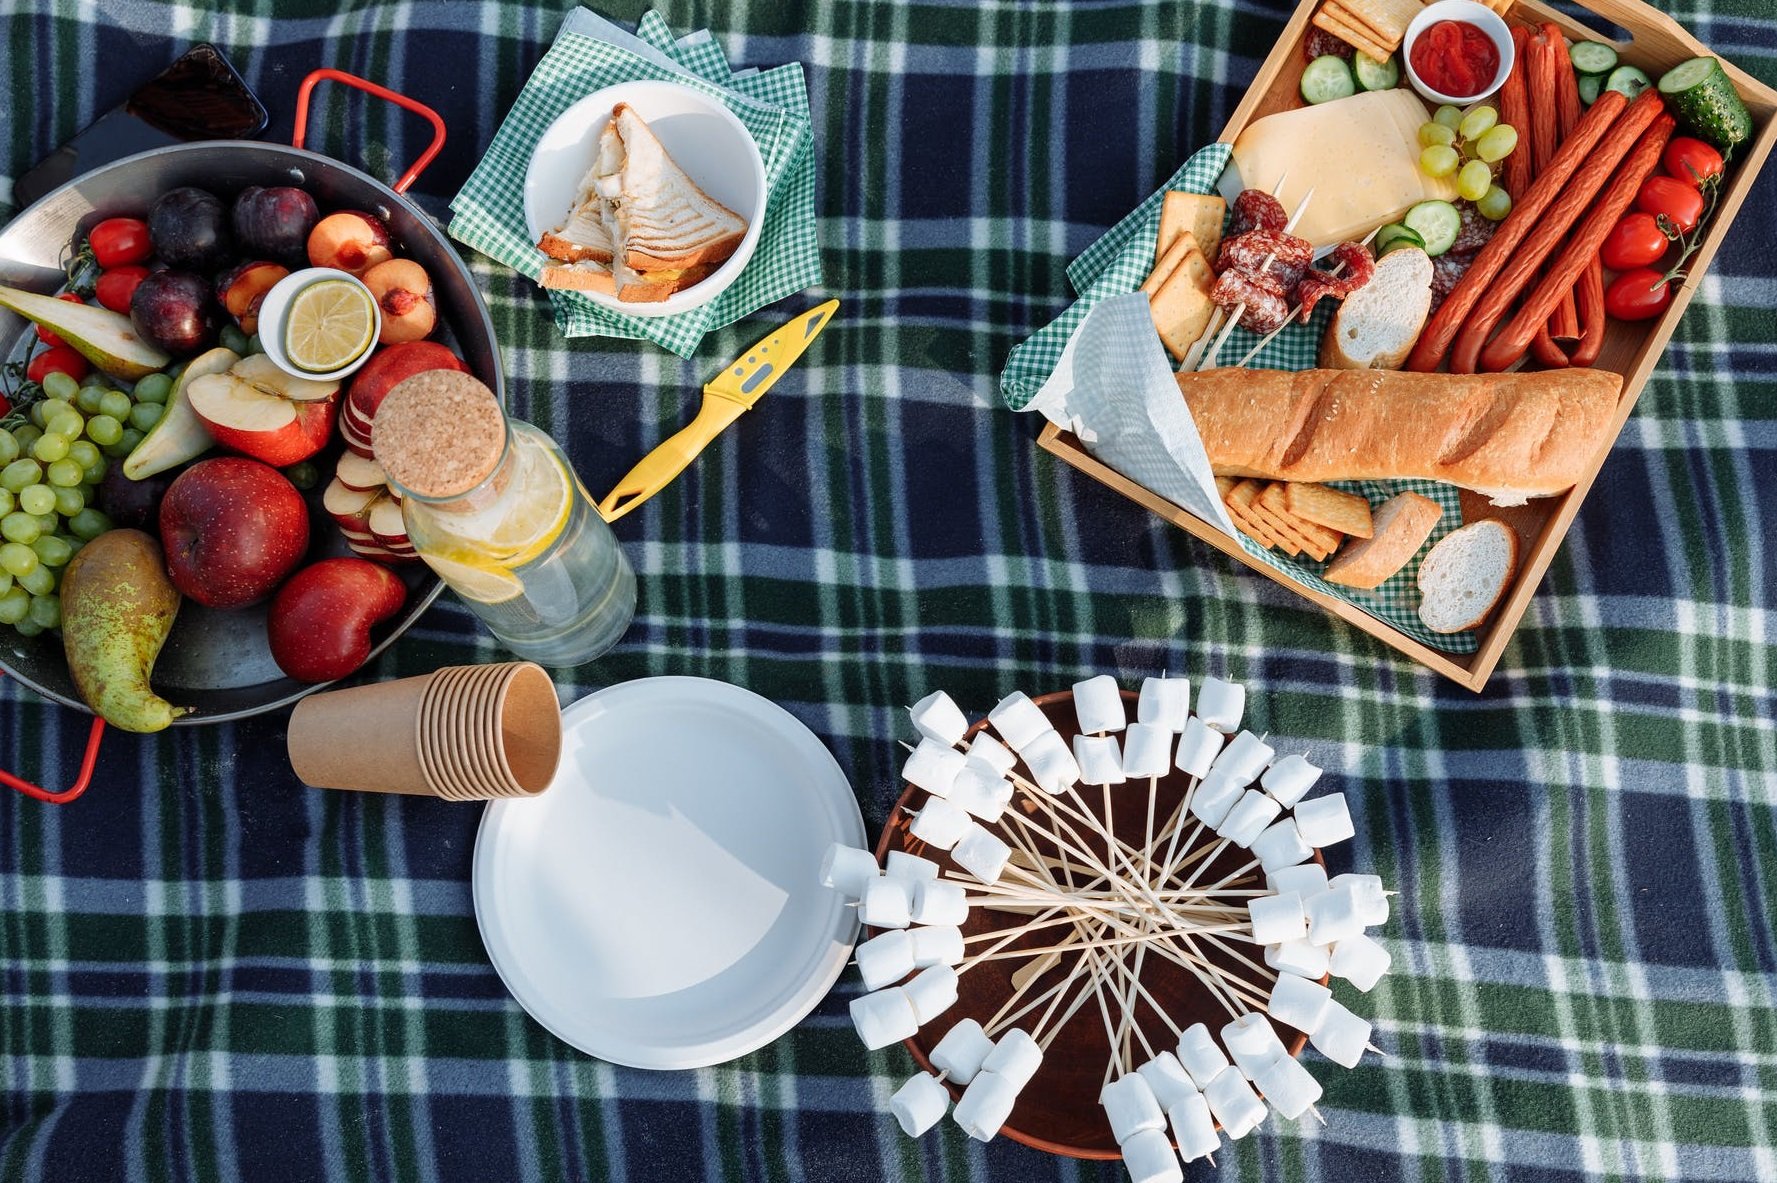 Custom Swag Pack Ideas for Corporate Picnics and Summer Outings